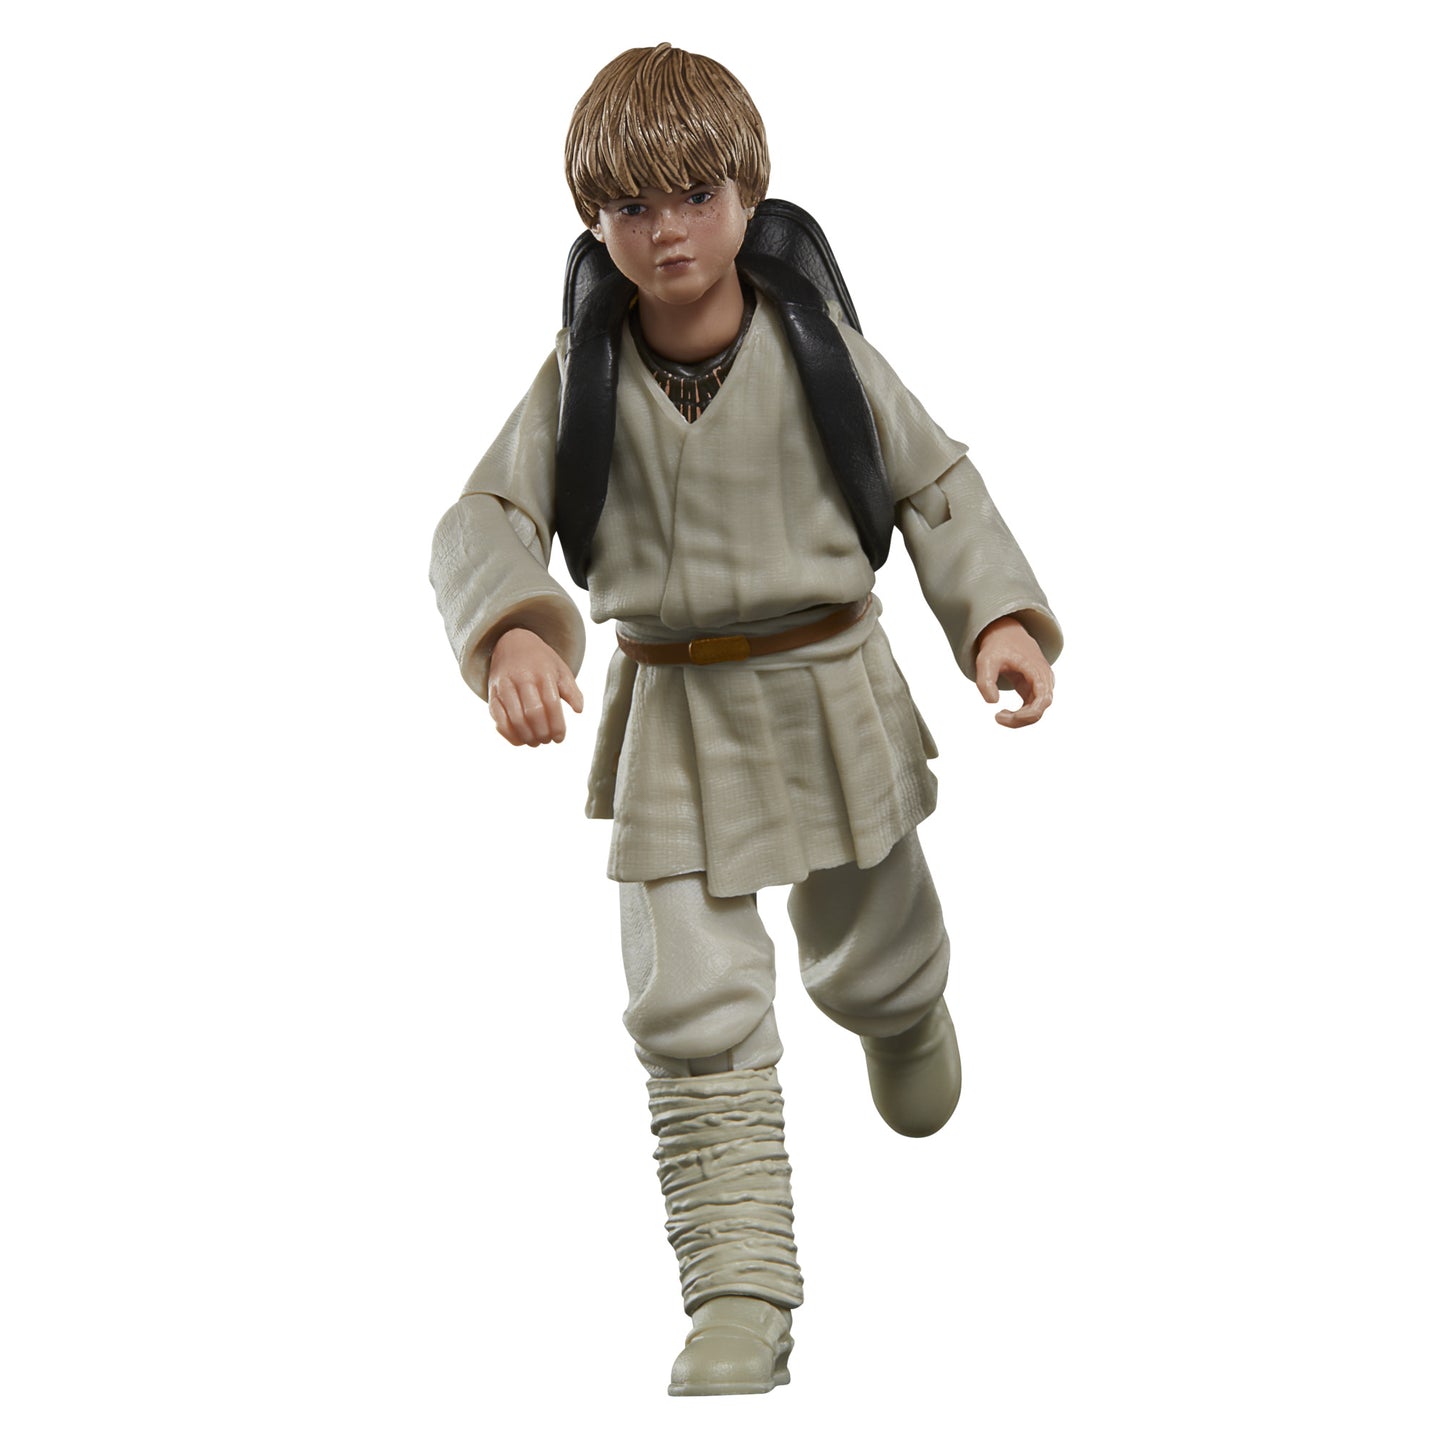 [PRE-ORDER] Star Wars The Black Series Anakin Skywalker, Star Wars: The Phantom Menace Collectible 6 Inch Action Figure, Ages 4 and Up